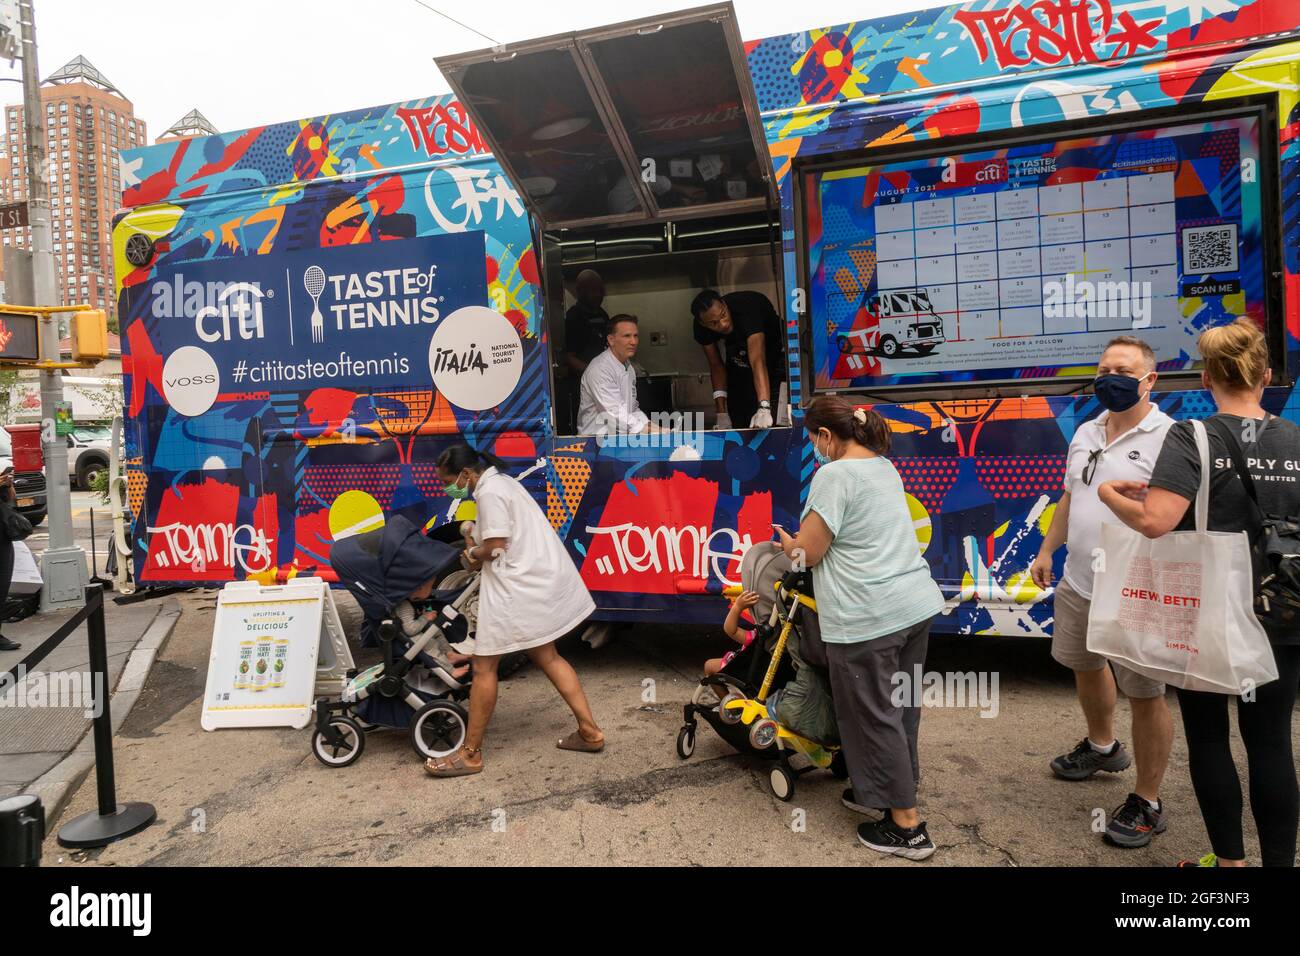 Us Open Fans High Resolution Stock Photography and Images - Alamy